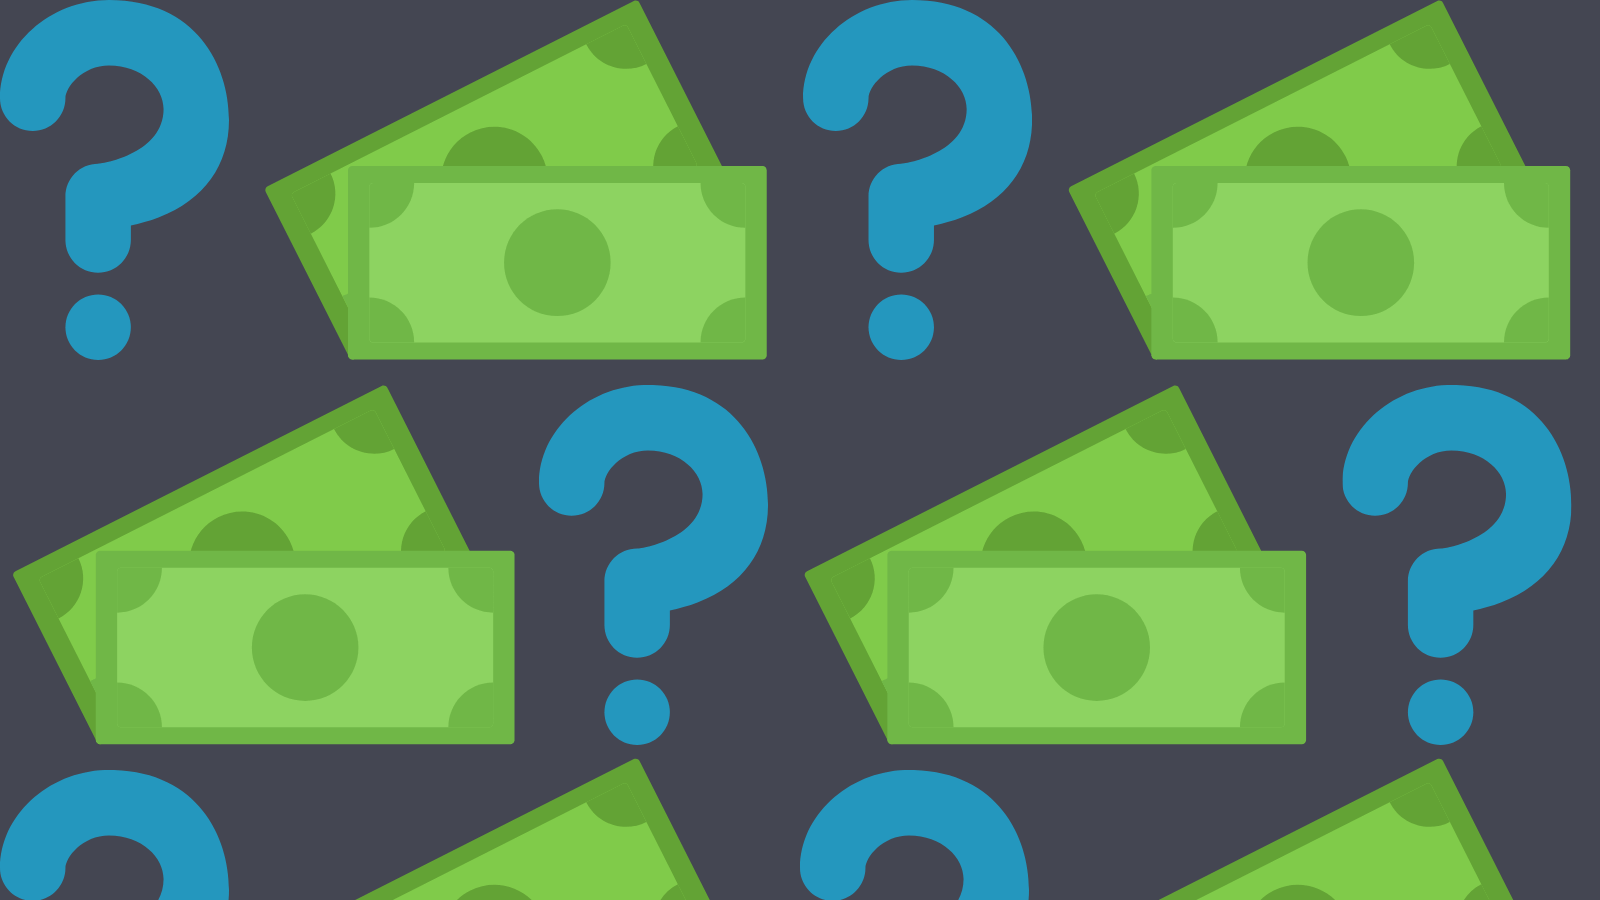 A question mark and a dollar bill in an alternating pattern